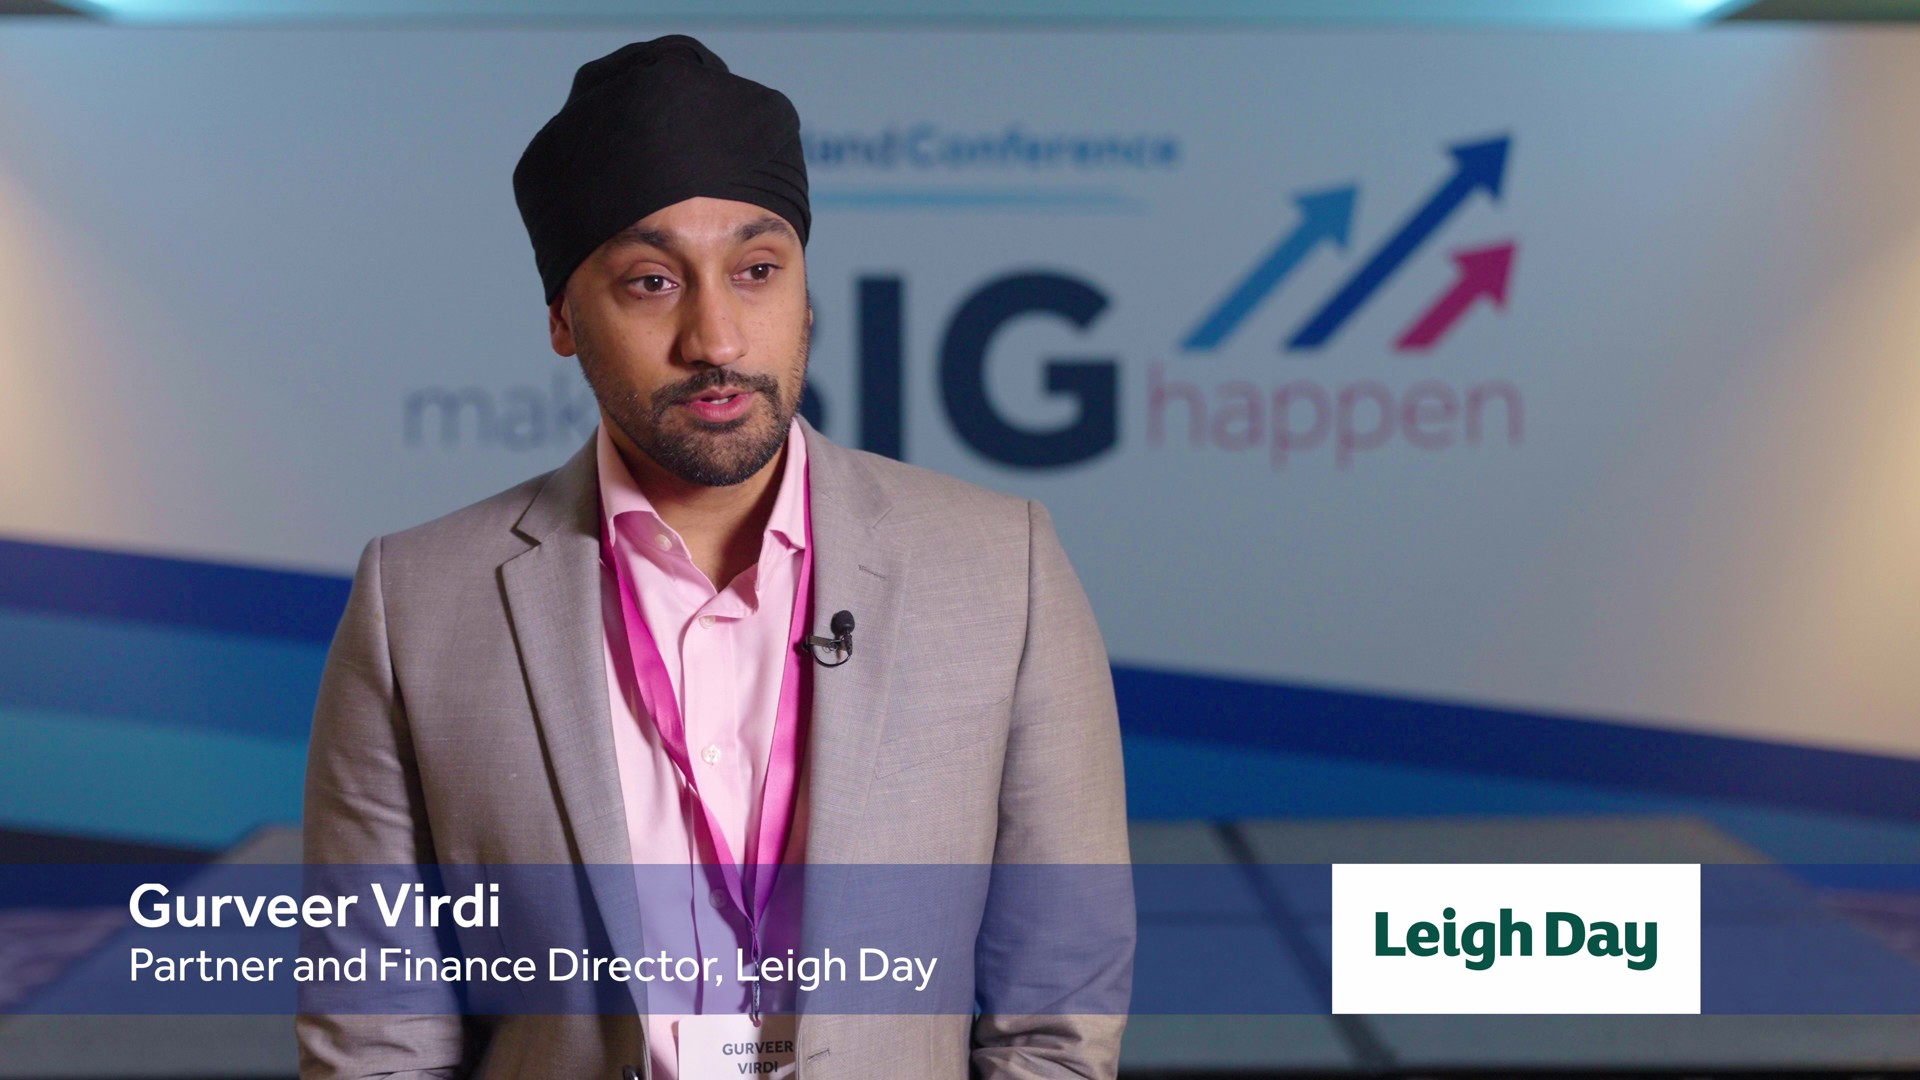 Client Testimonial - Business Intelligence - Leigh Day